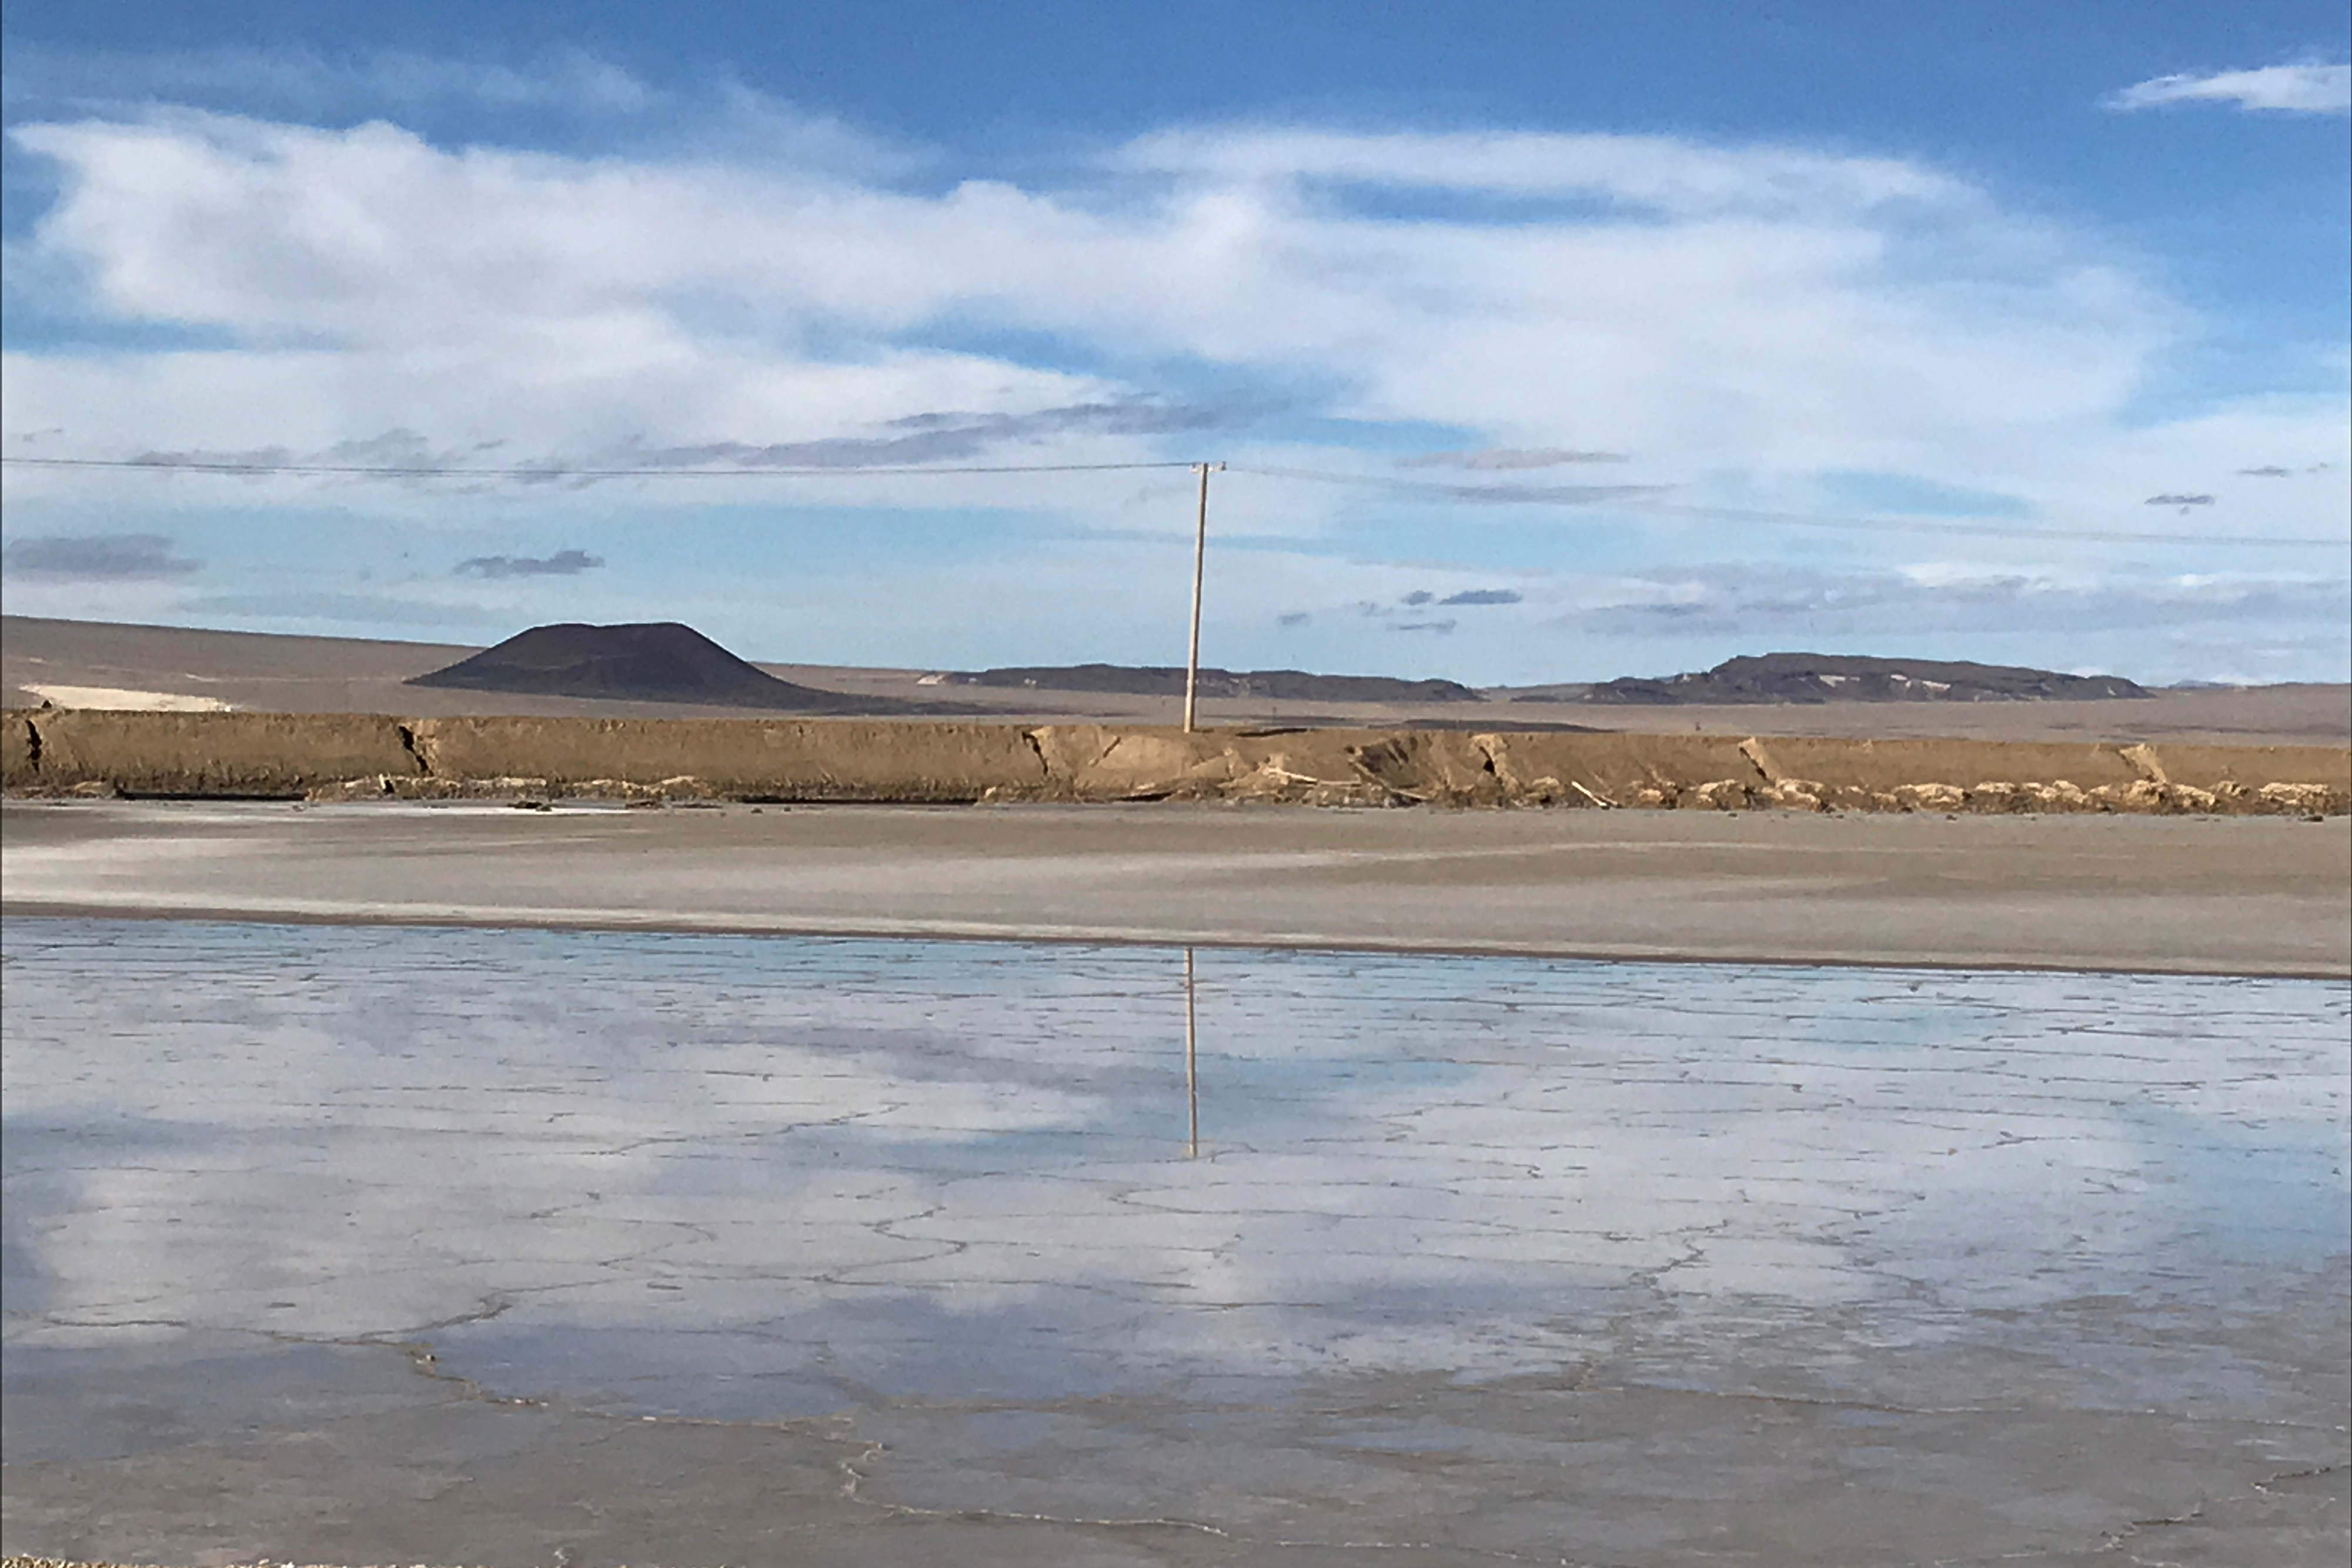 One of Albemarle's lithium evaporation ponds reflects the sky at its facility in Silver Peak